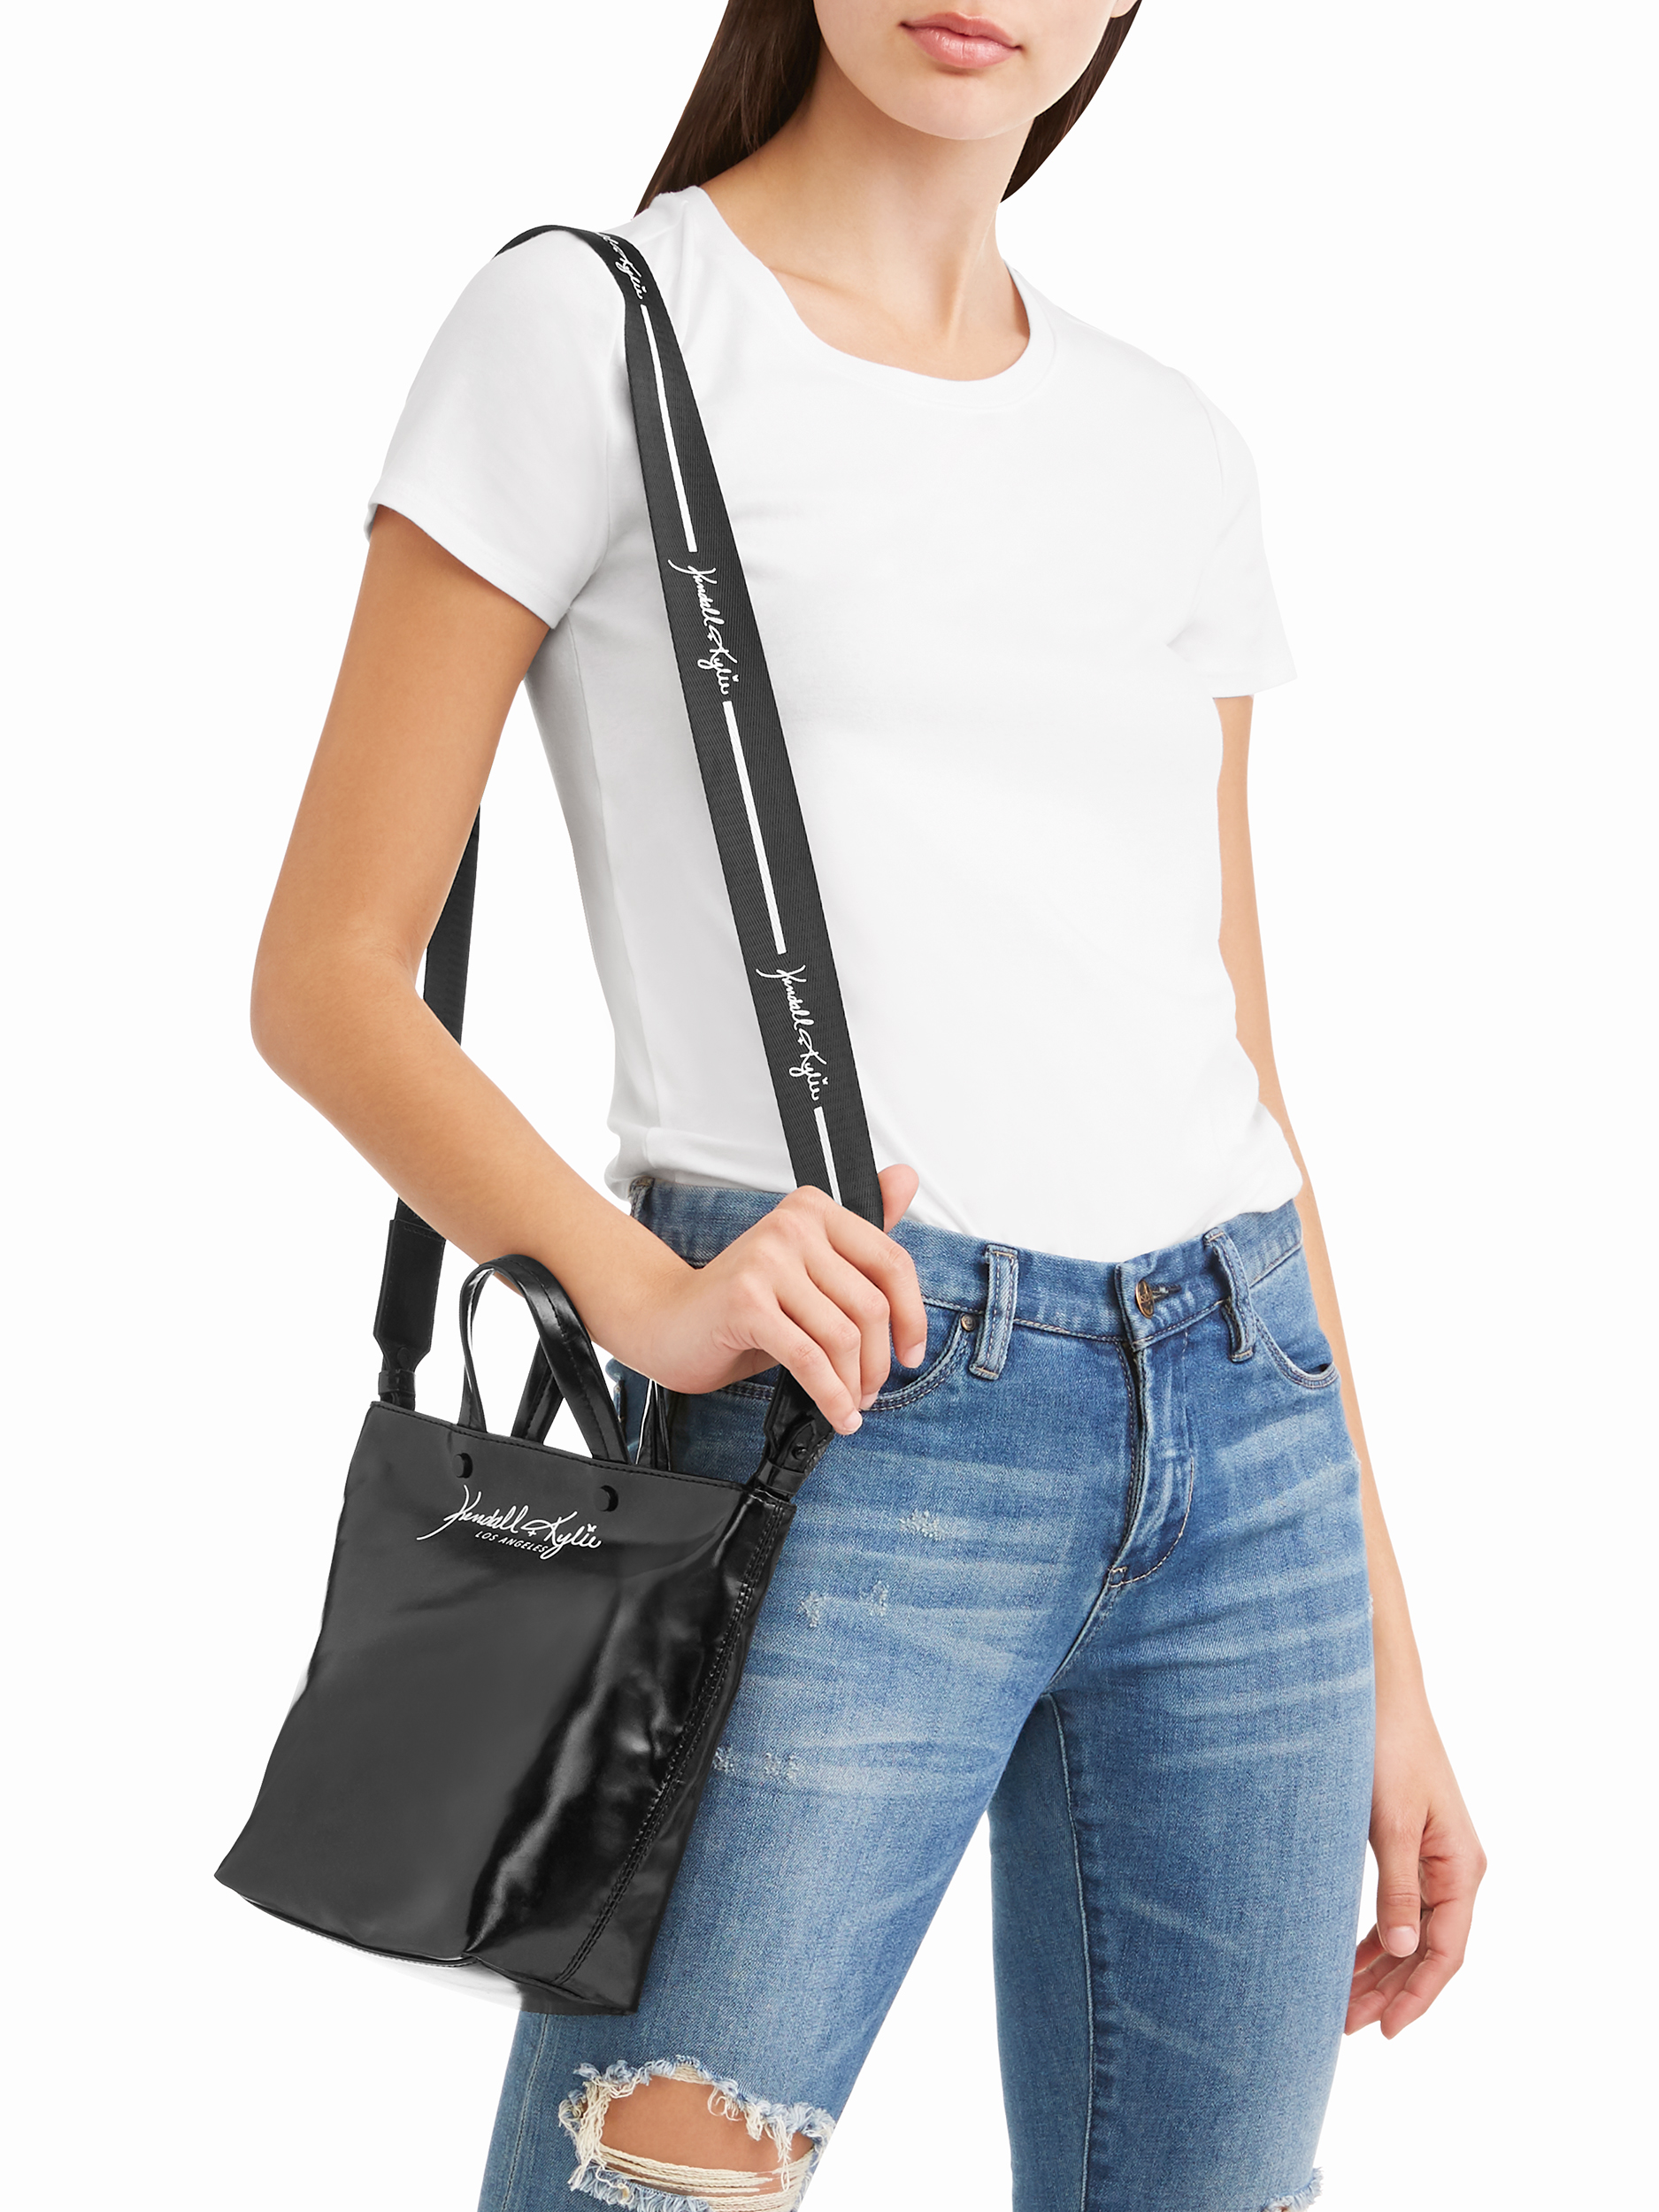 Kendall + Kylie for Walmart Black Mini Tote Crossbody - image 2 of 5